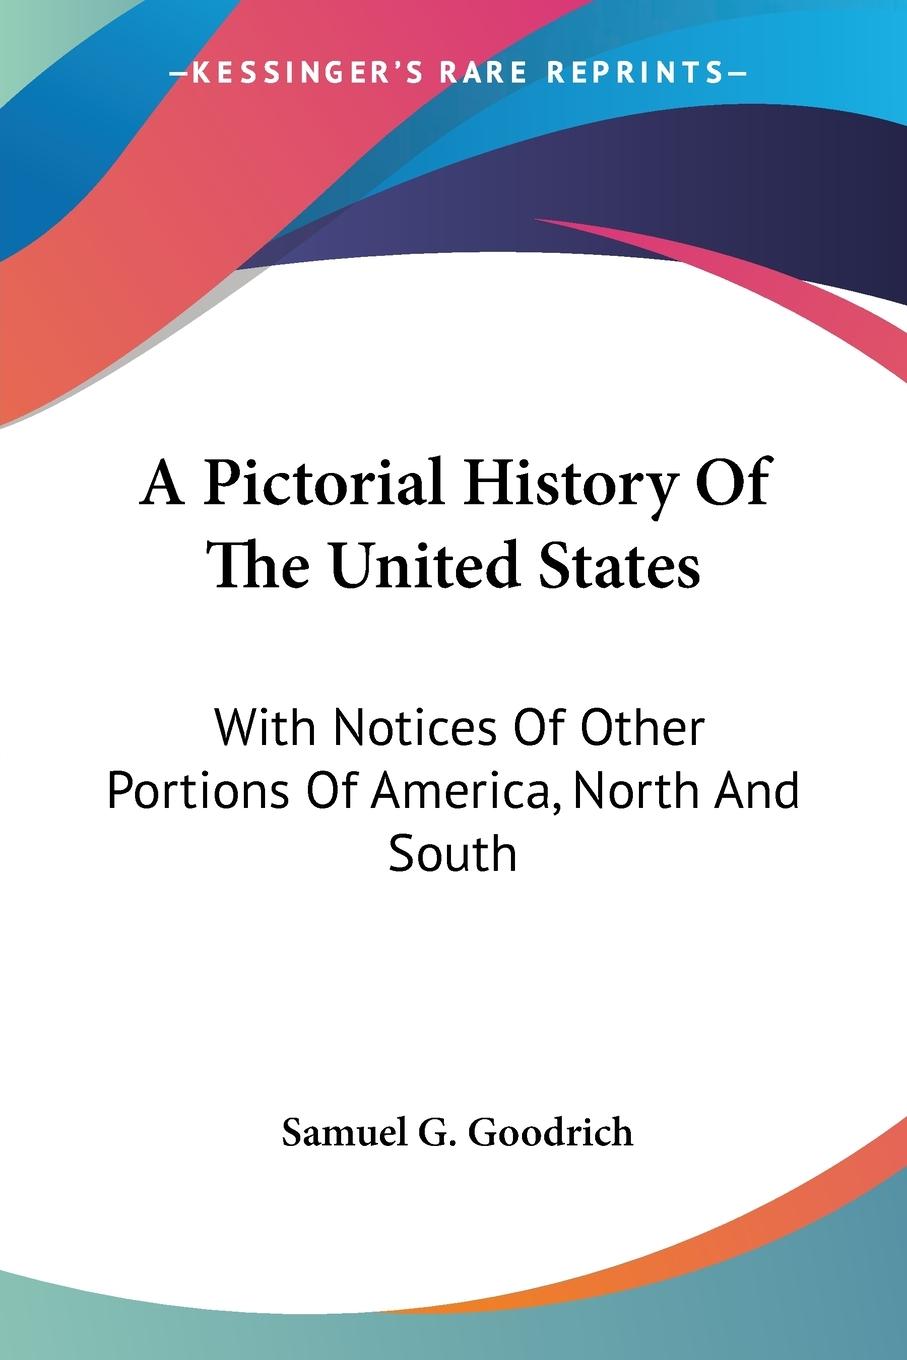 A Pictorial History Of The United States - Goodrich, Samuel G.